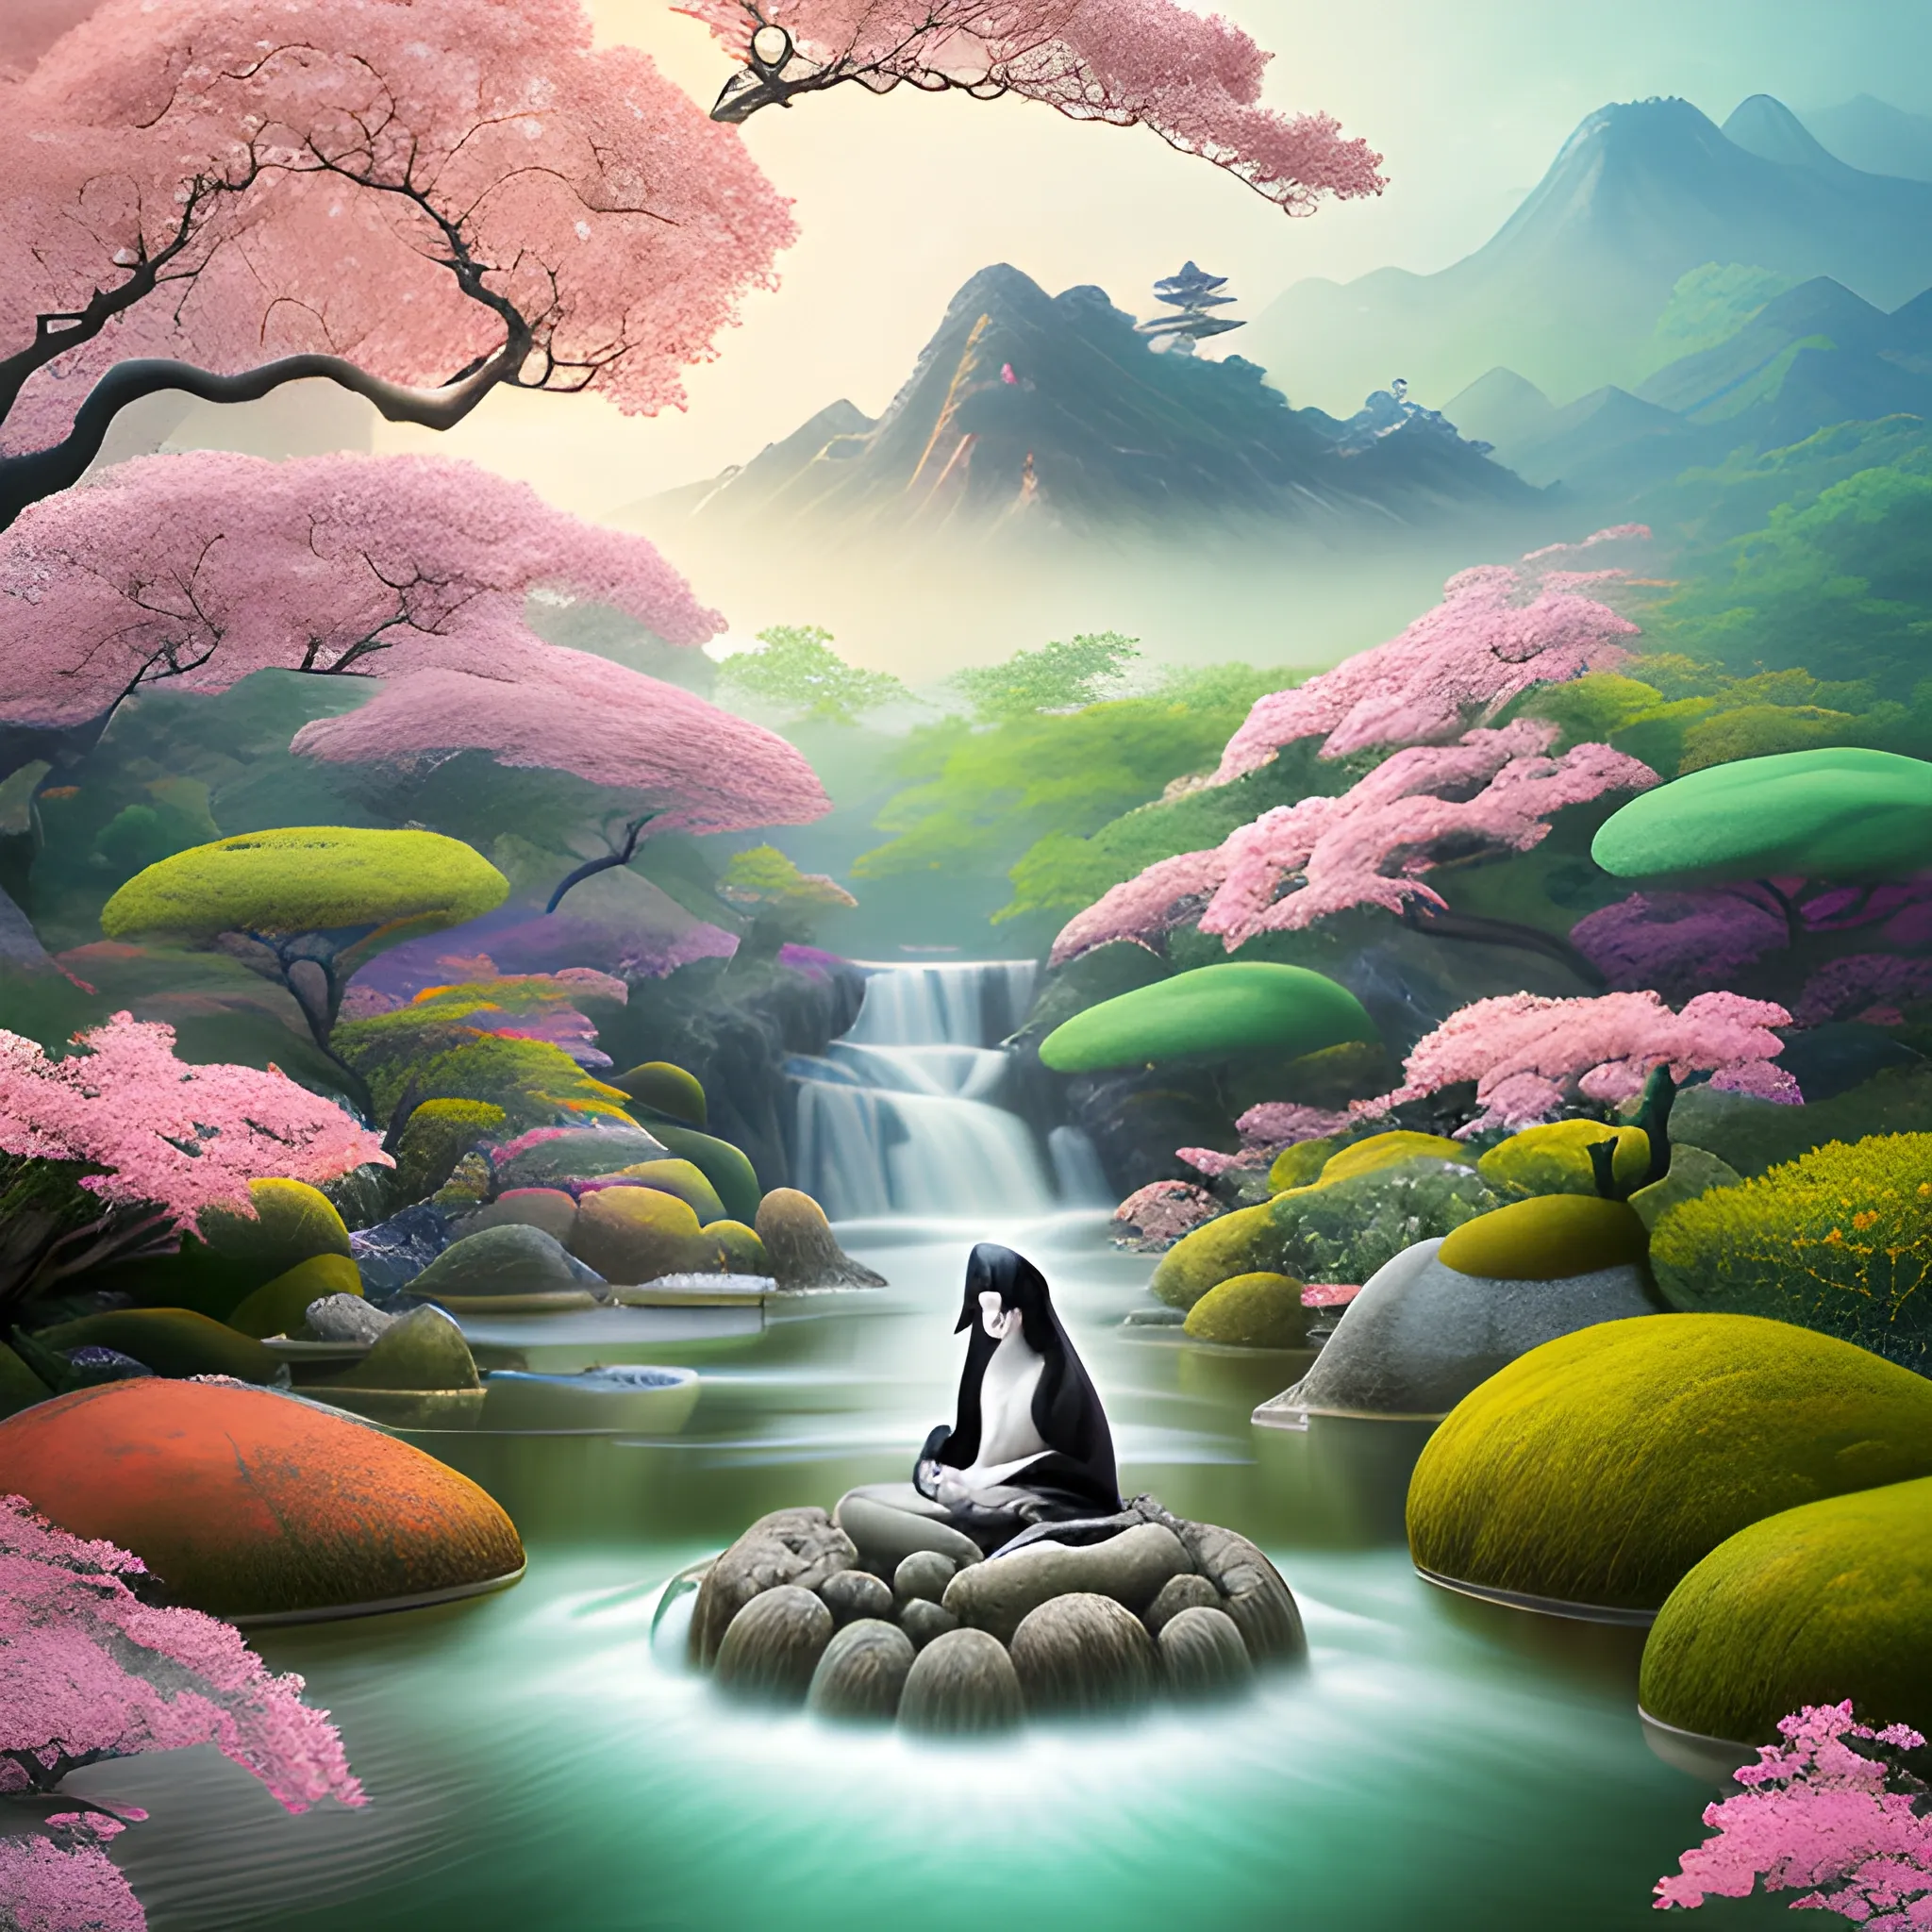 (by Ananta Mandal (and Andrew Biraj:0.5)), (in the style of nihonga), Style: Abstract, Medium: Digital illustration, Subject: A Guanshiyin Pusa in the middle of picture, An otherworldly landscape with floating islands, cascading waterfalls, and vibrant flora and fauna. Camera Angle: Overhead shot capturing the vastness and intricate details of the scene. The colors are saturated, and the lighting creates a warm and ethereal atmosphere. The painting is highly detailed, with every brushstroke capturing the complexity of the imaginary world., (high quality), (detailed), (masterpiece), (best quality), (highres), (extremely detailed), (8k), seed:792315689